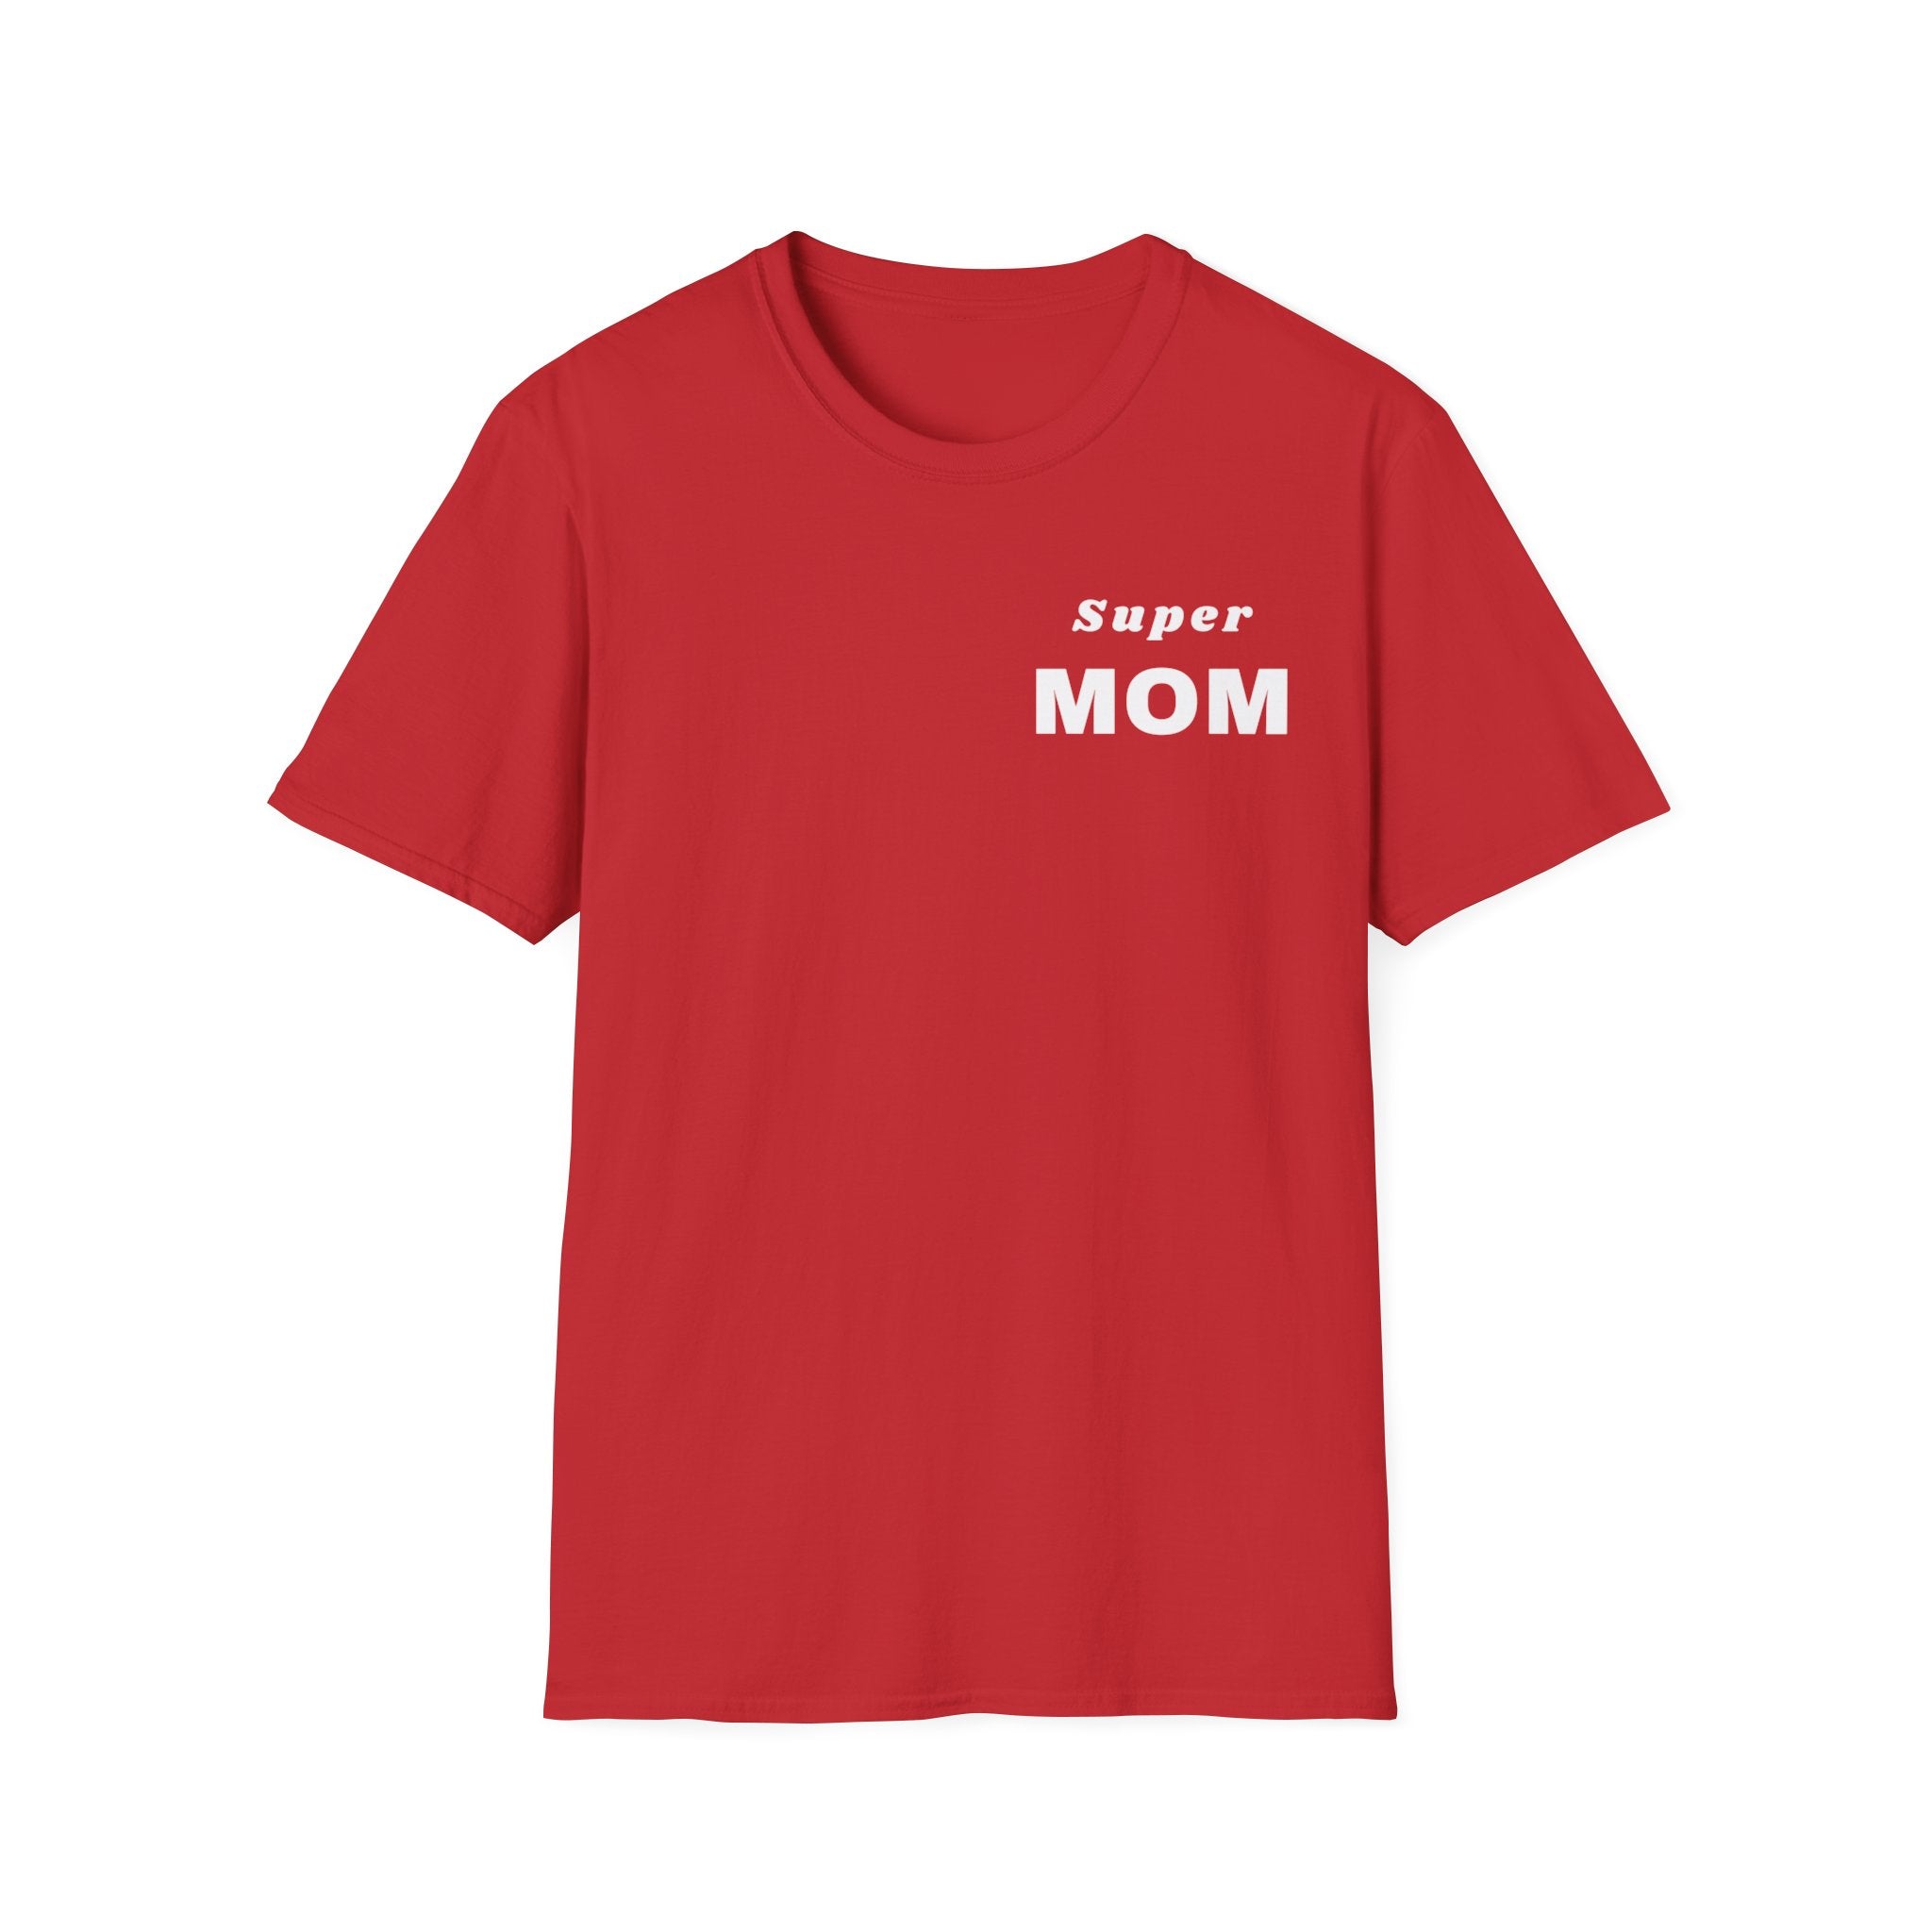 Super Mom Unisex Softstyle Crew Neck T-Shirt, Mother's Day Gift, Gift for Mom, Mom's Shirt